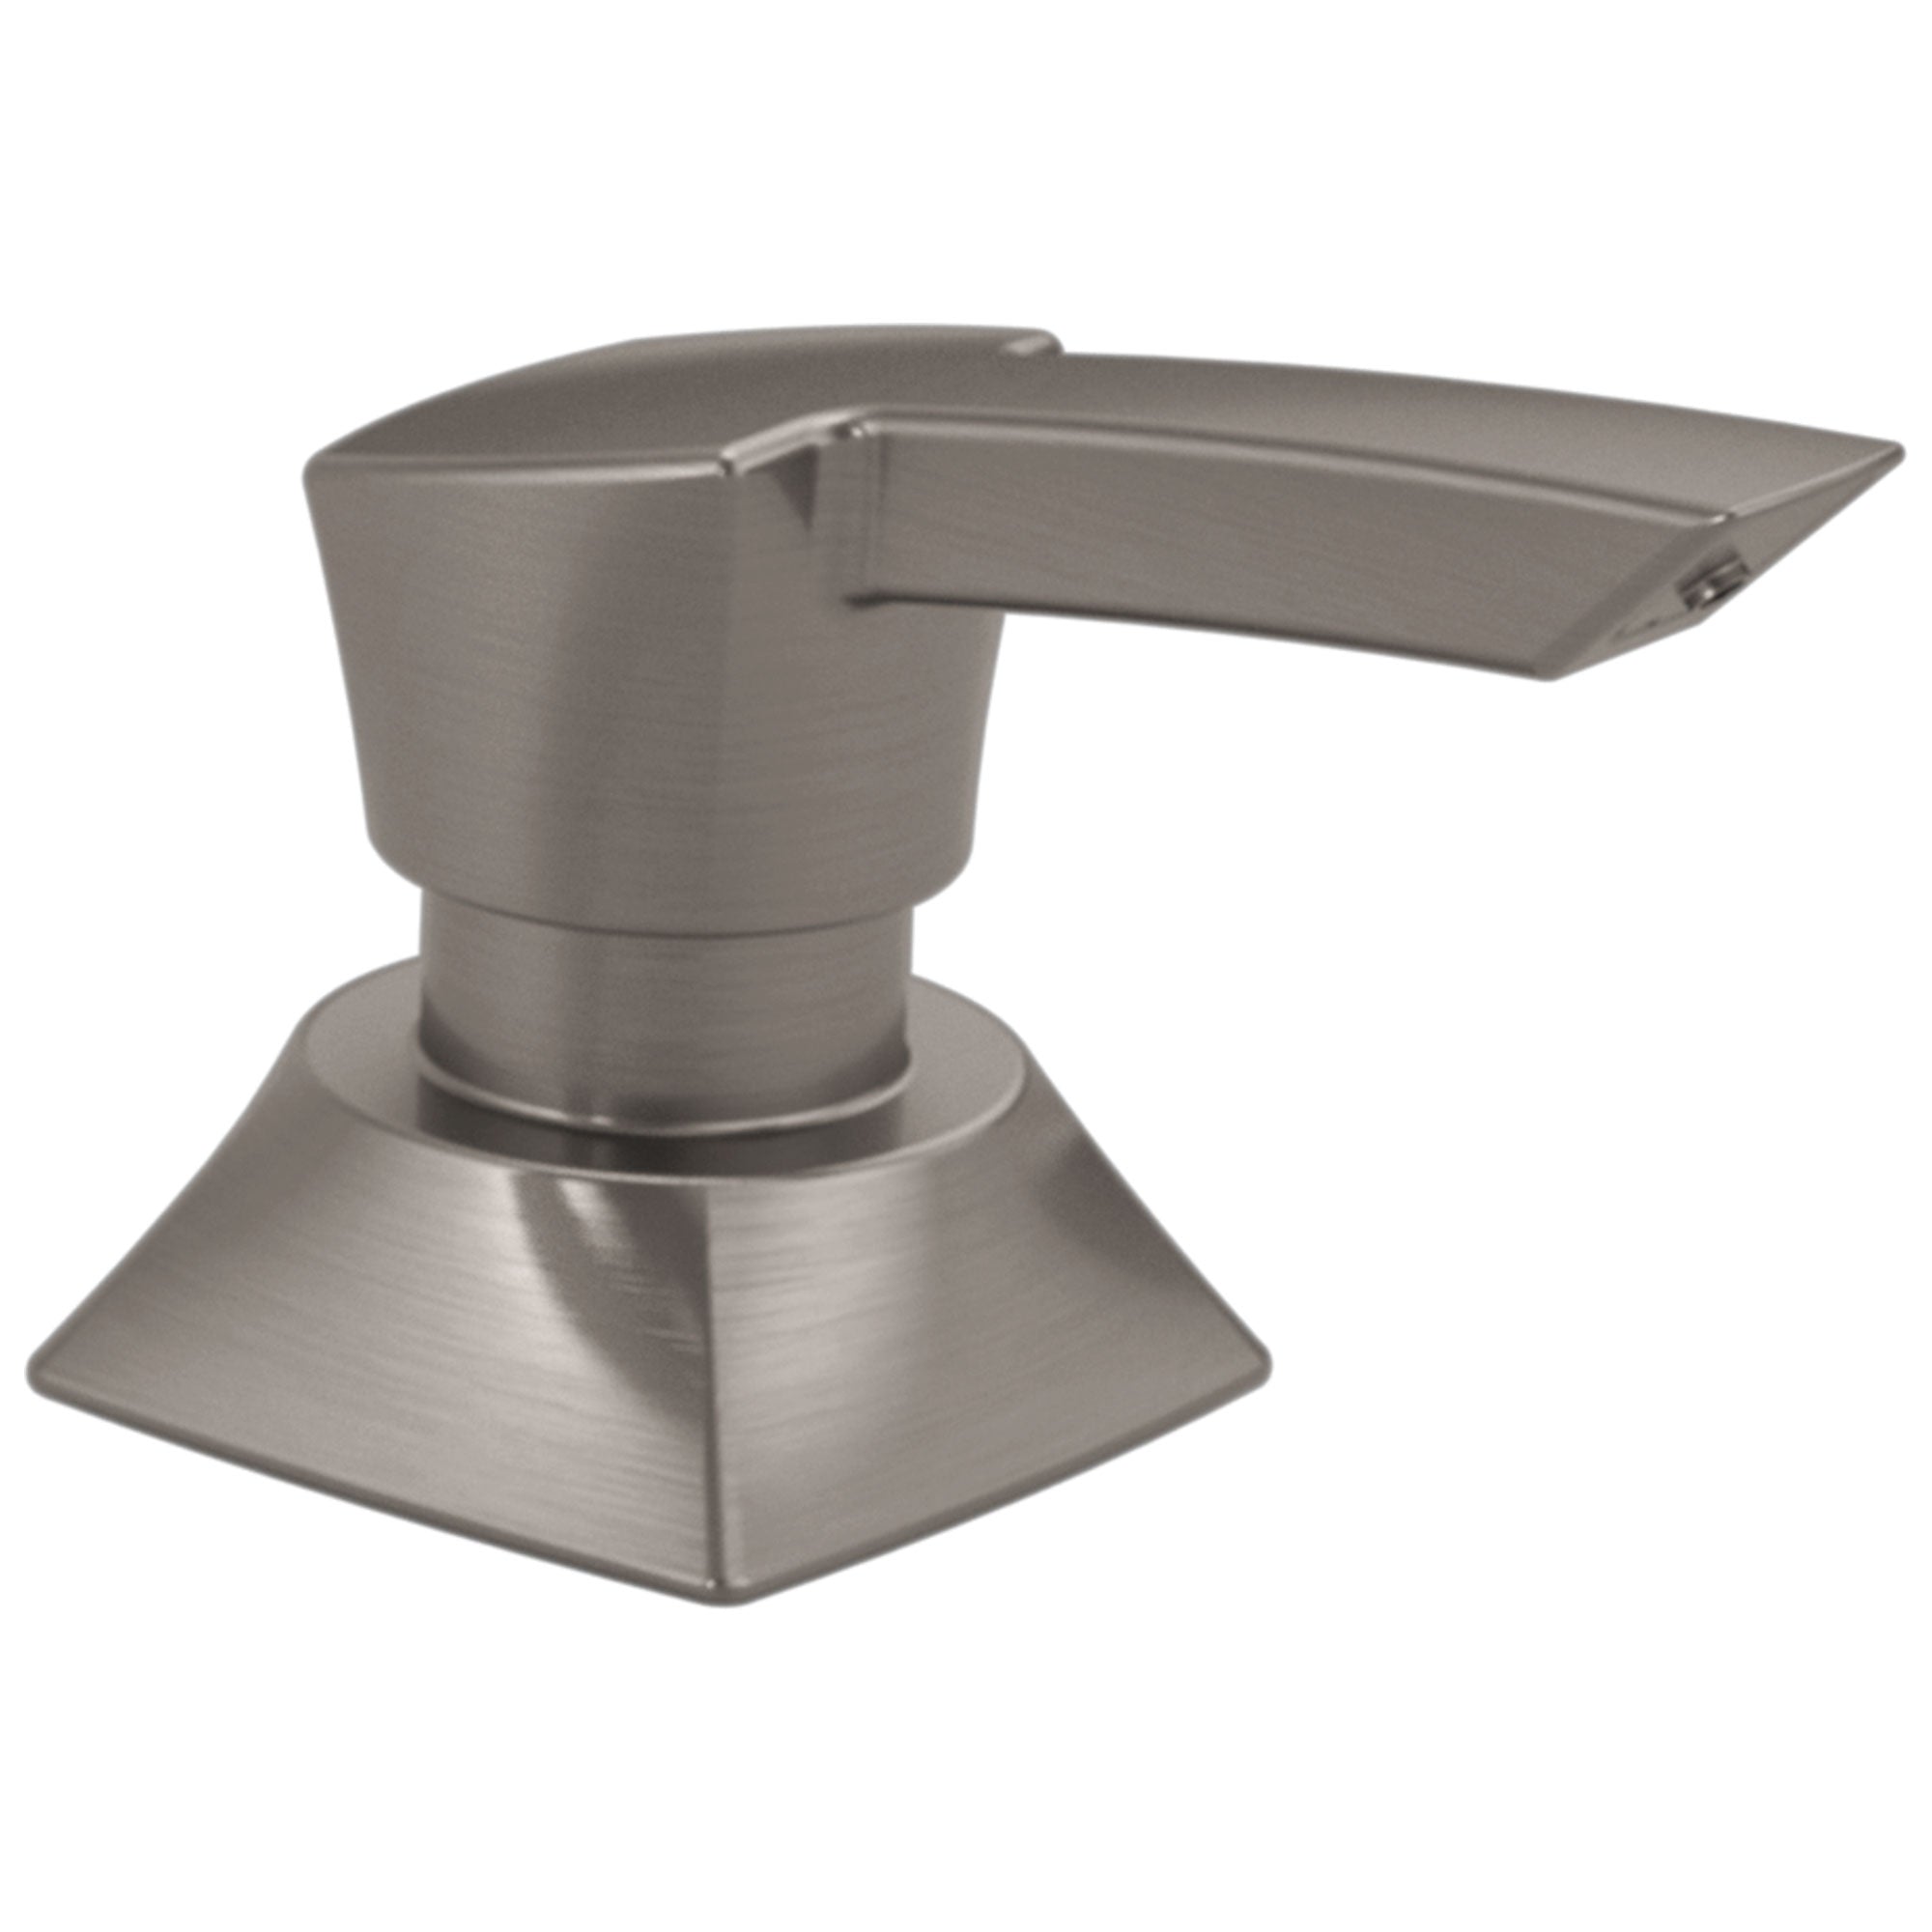 Delta Stainless Steel Finish Contemporary Modern Soap / Lotion Dispenser Assembly DRP82129SP